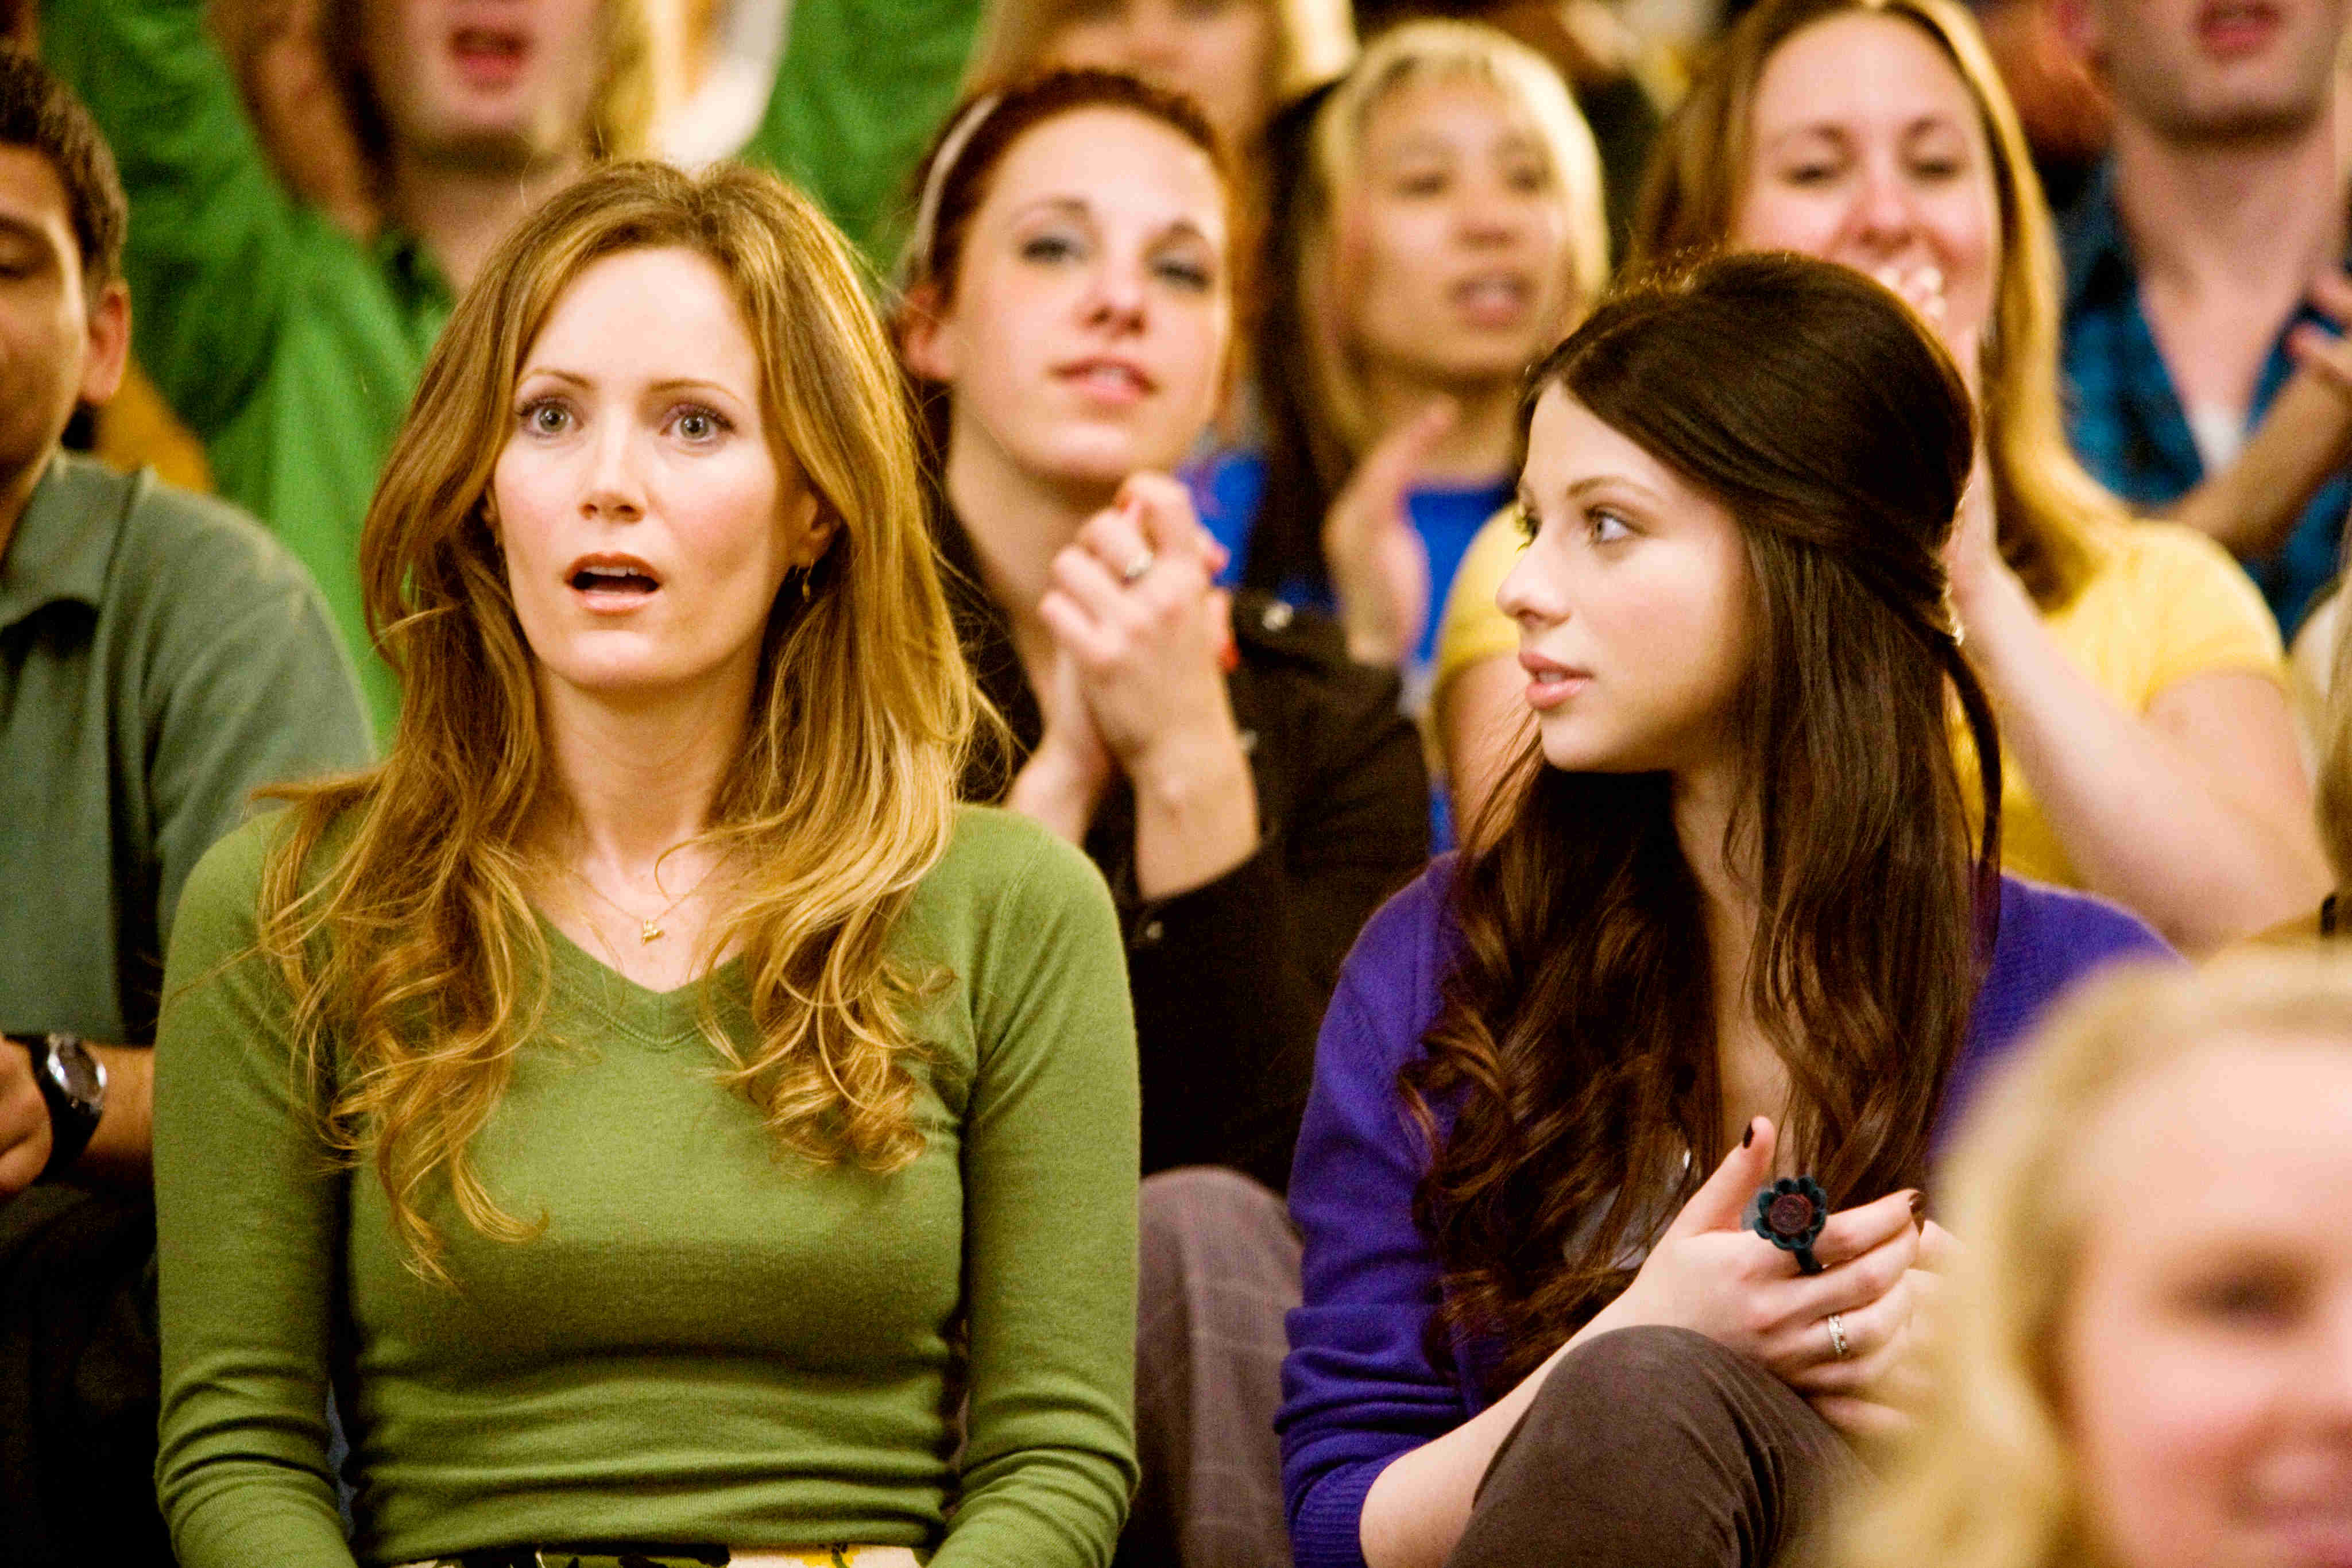 Leslie Mann stars as Scarlett O'Donnell - Adult and Michelle Trachtenberg stars as Maggie O'Donnell in New Line Cinema's 17 Again (2009)